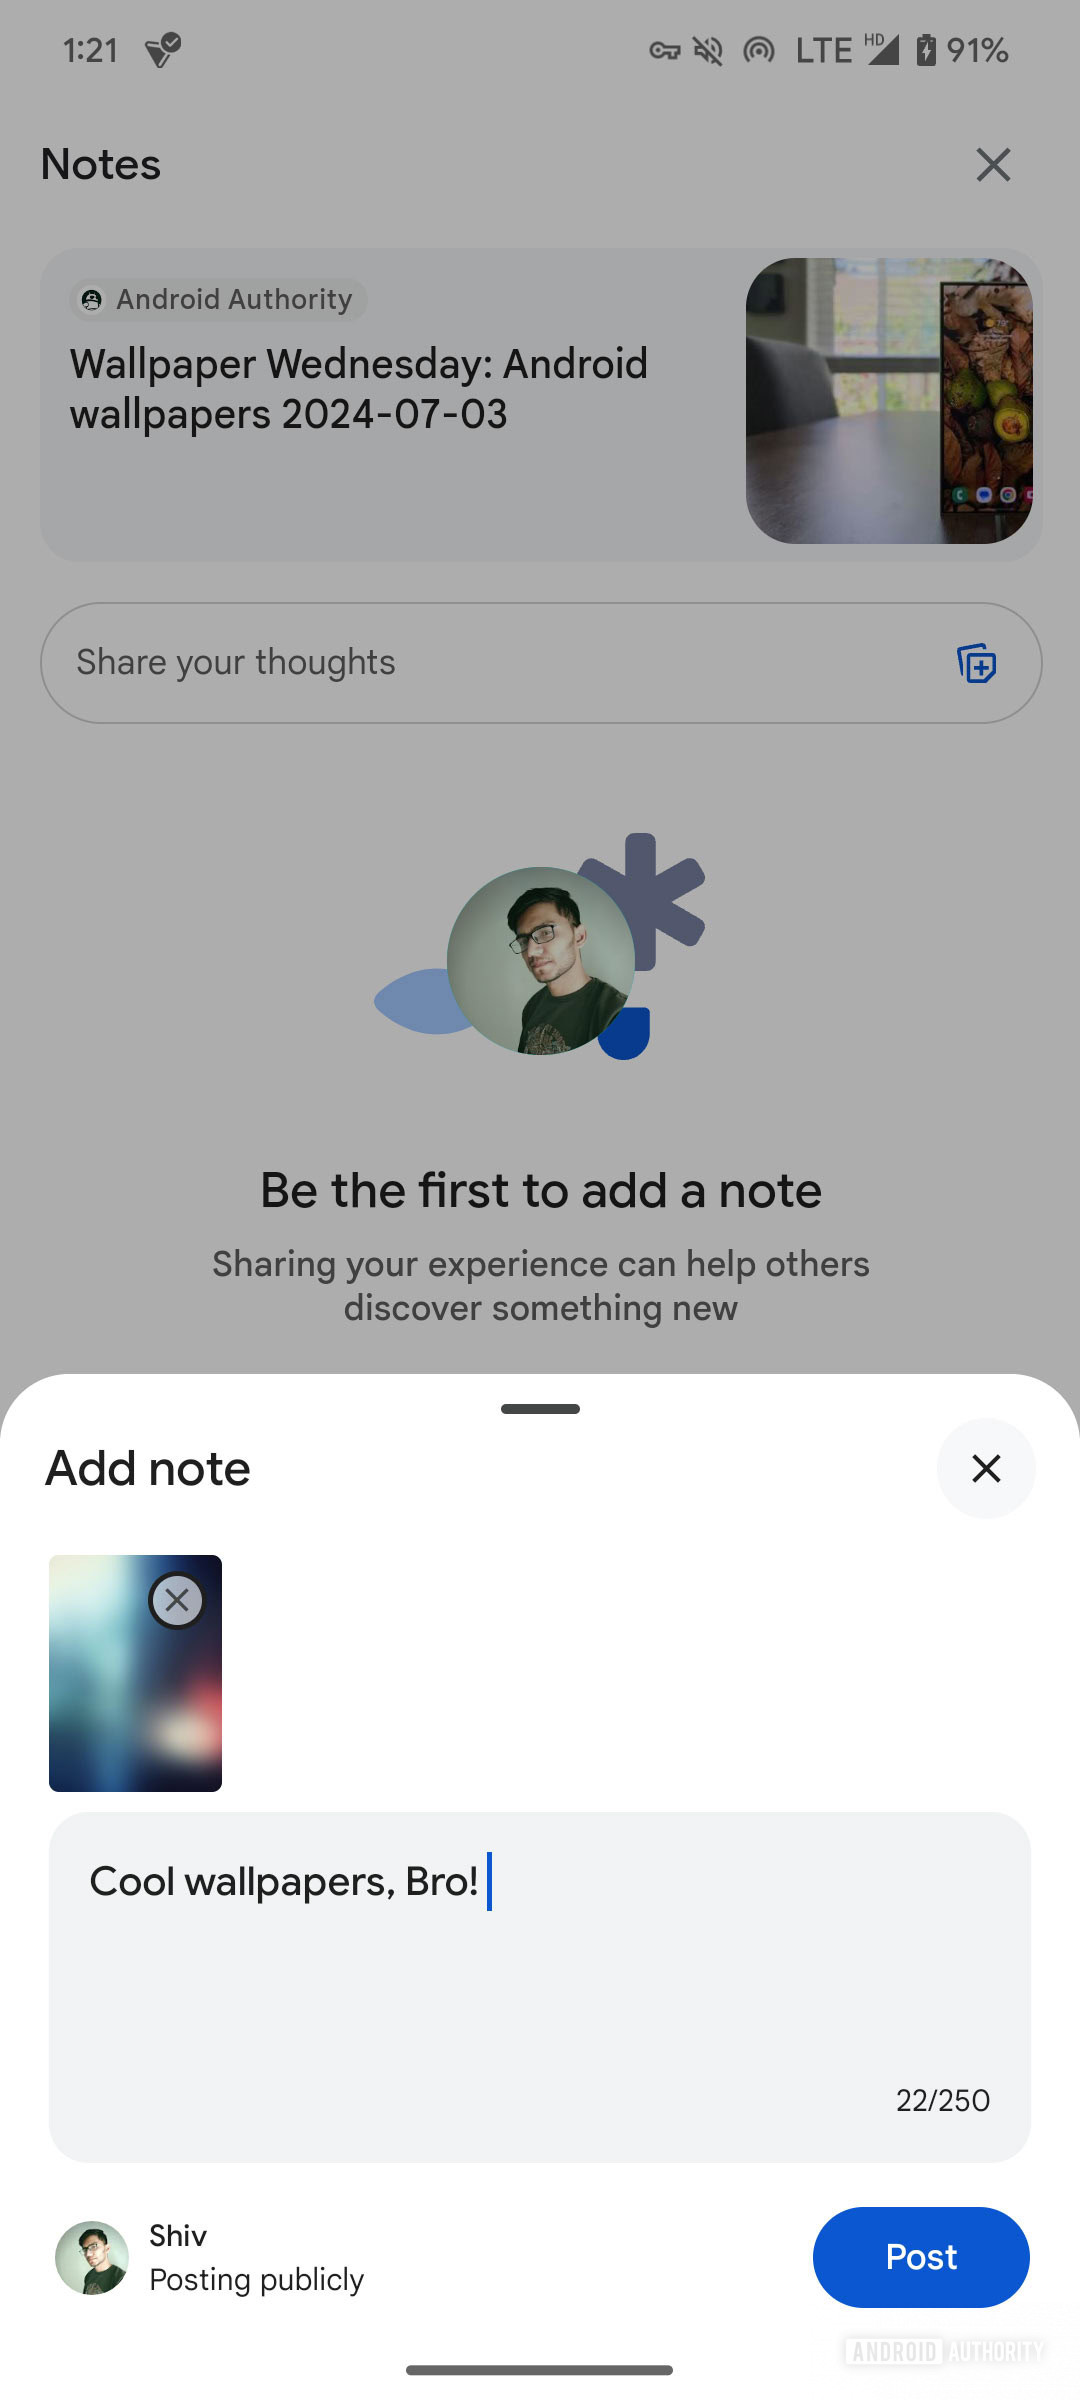 Google Search letting users choose a background image for Notes